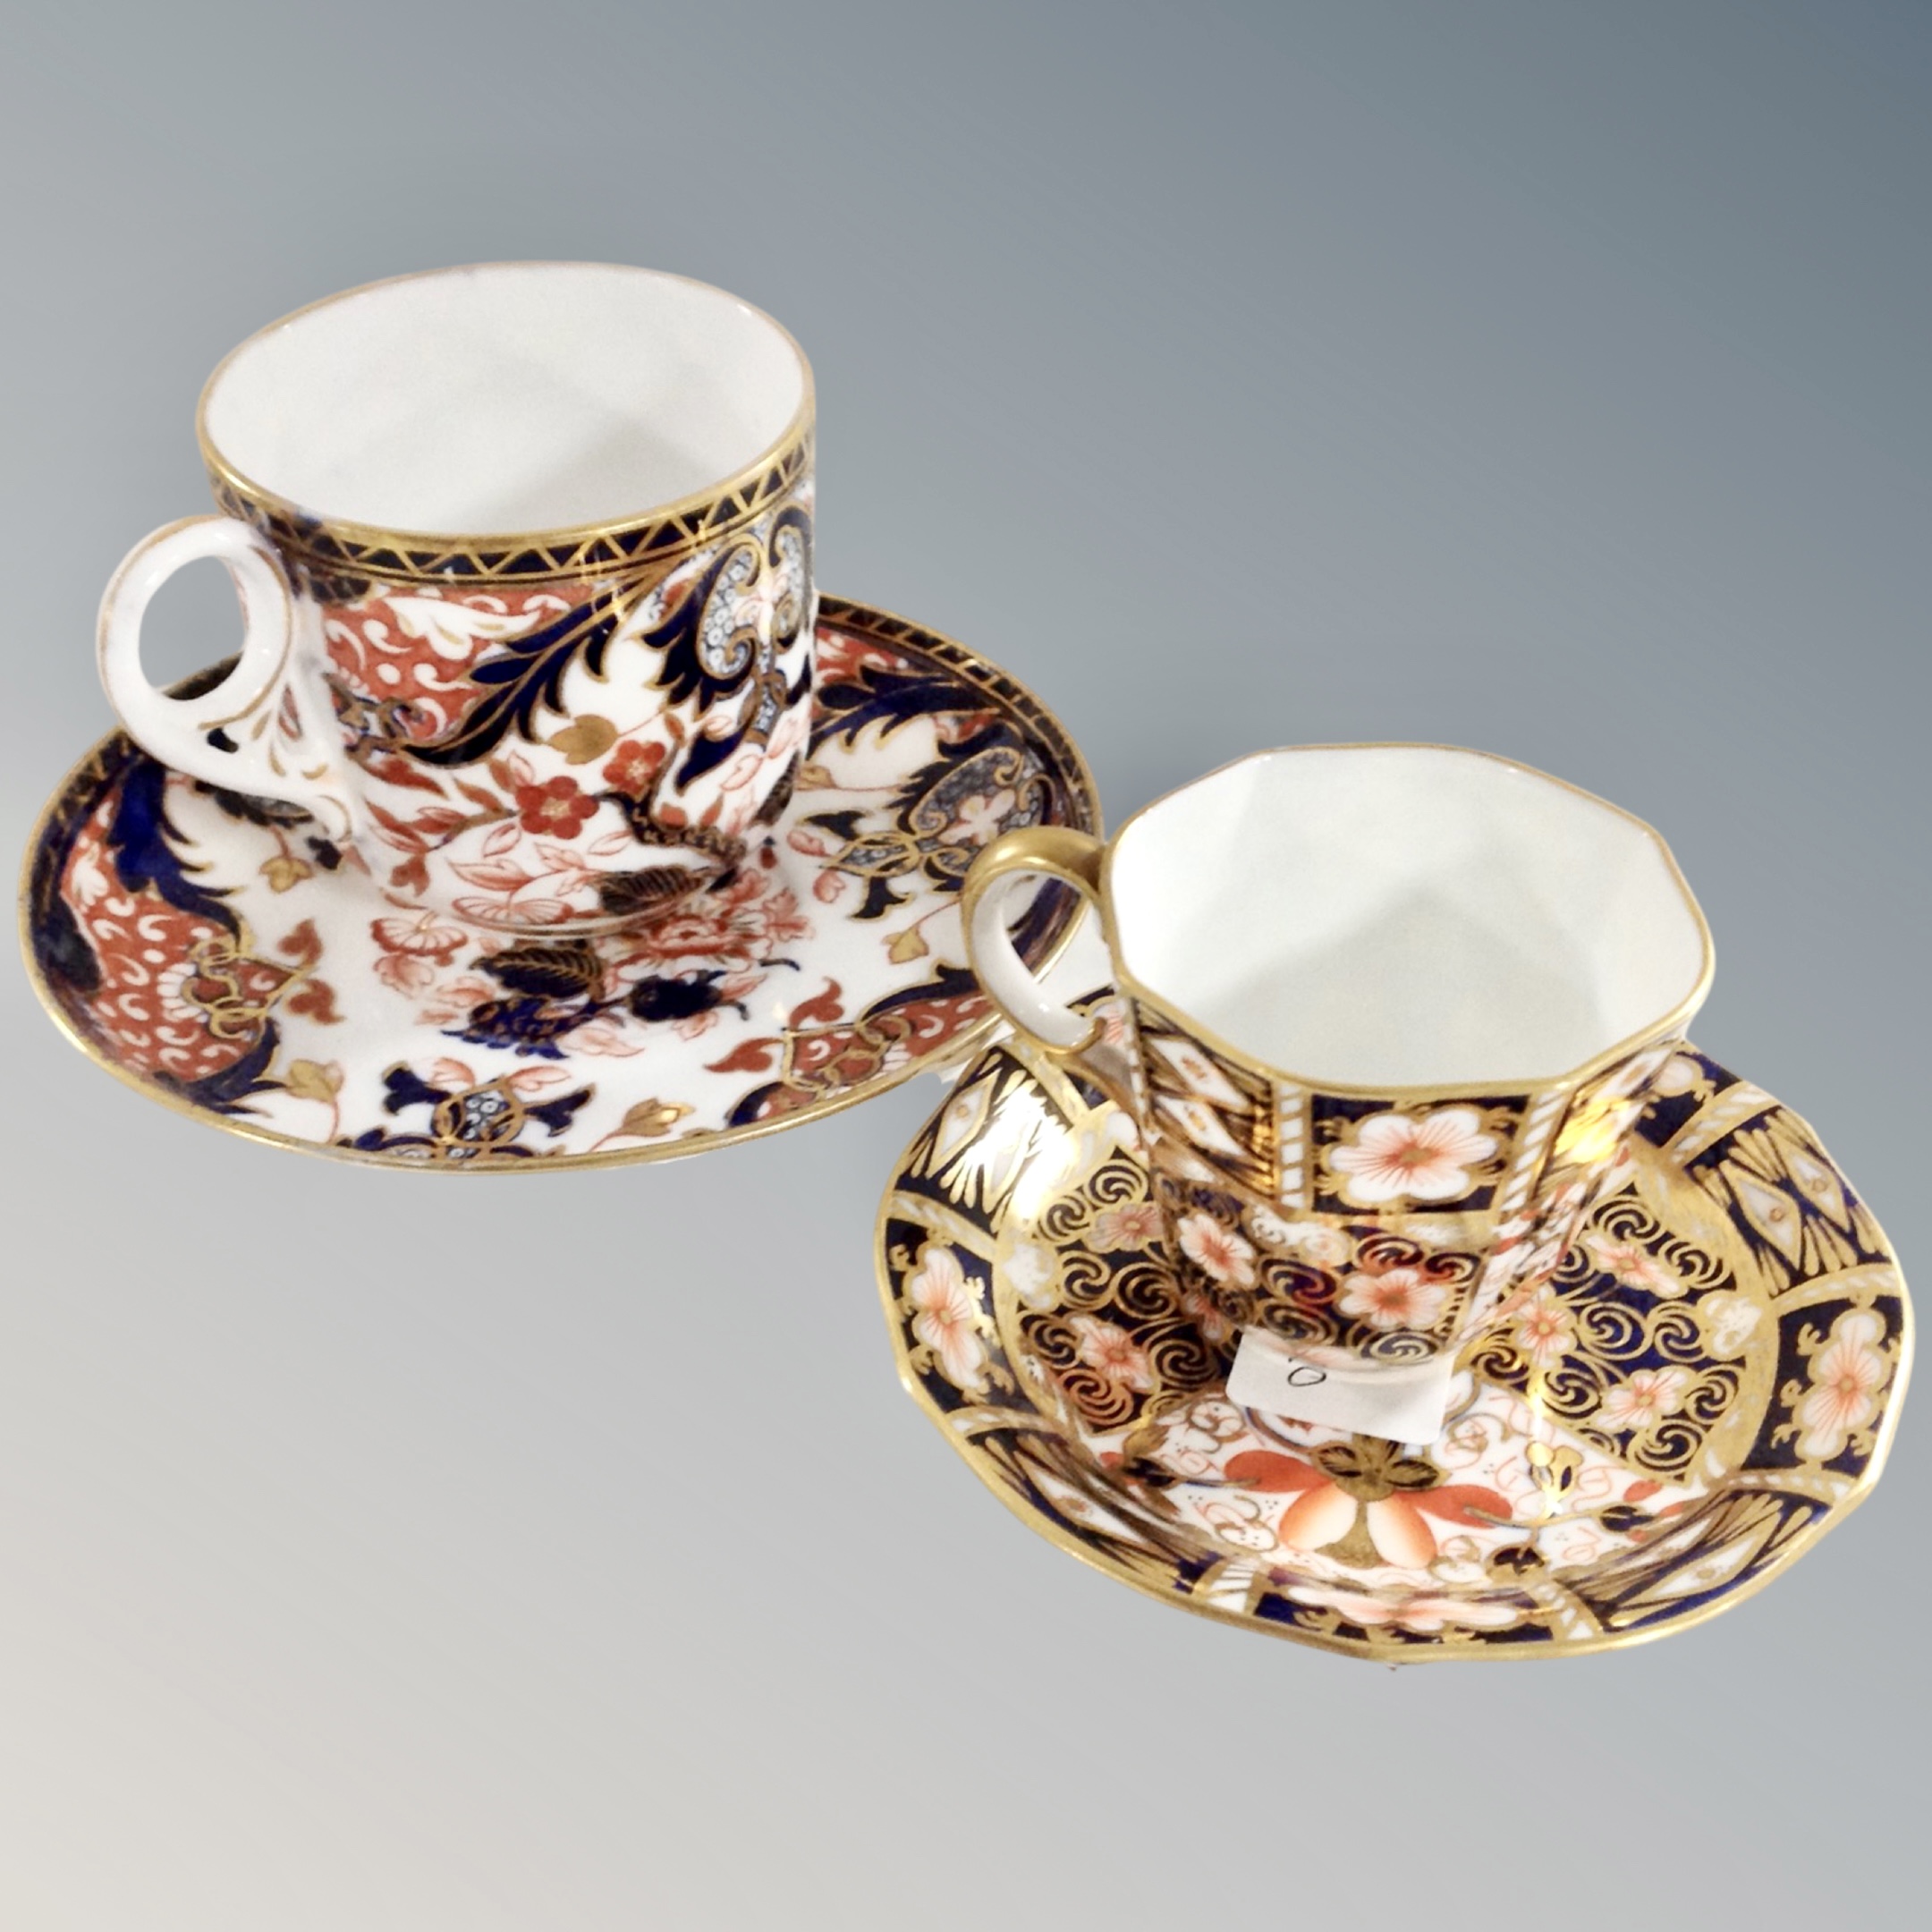 A 20th century Royal Crown Derby Imari teacup and saucer together with a further 19th century